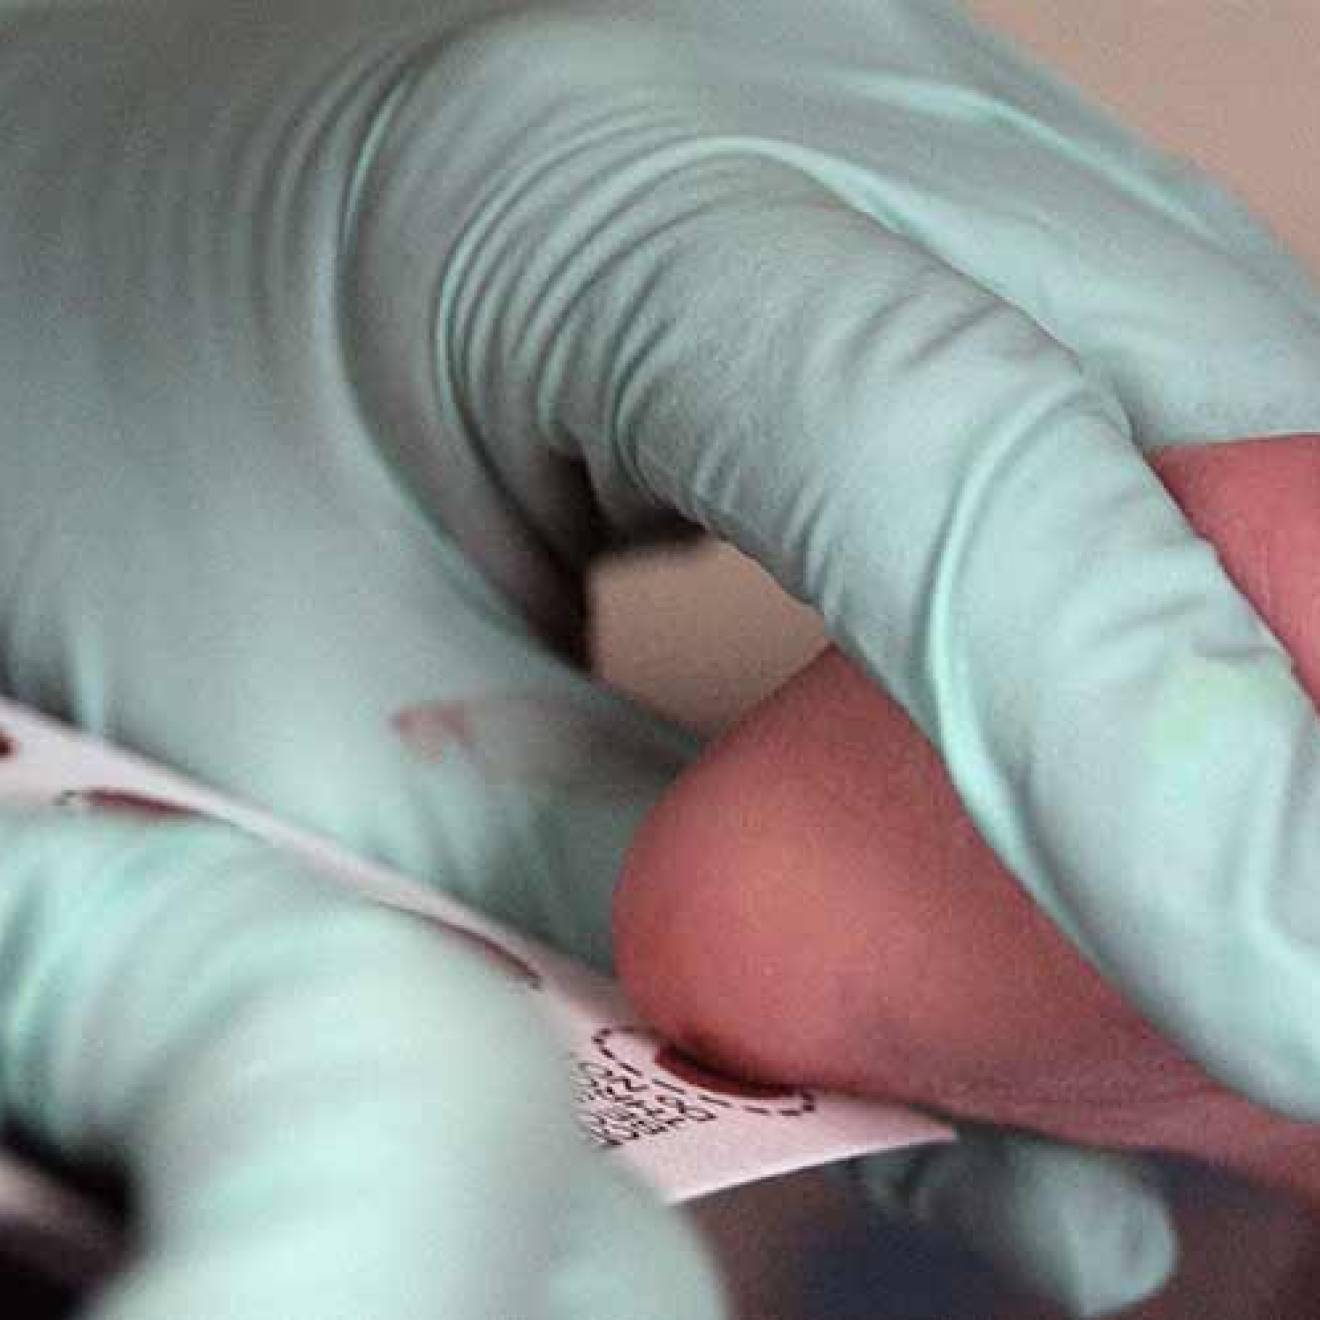 Baby's foot held by doctor for a blood test